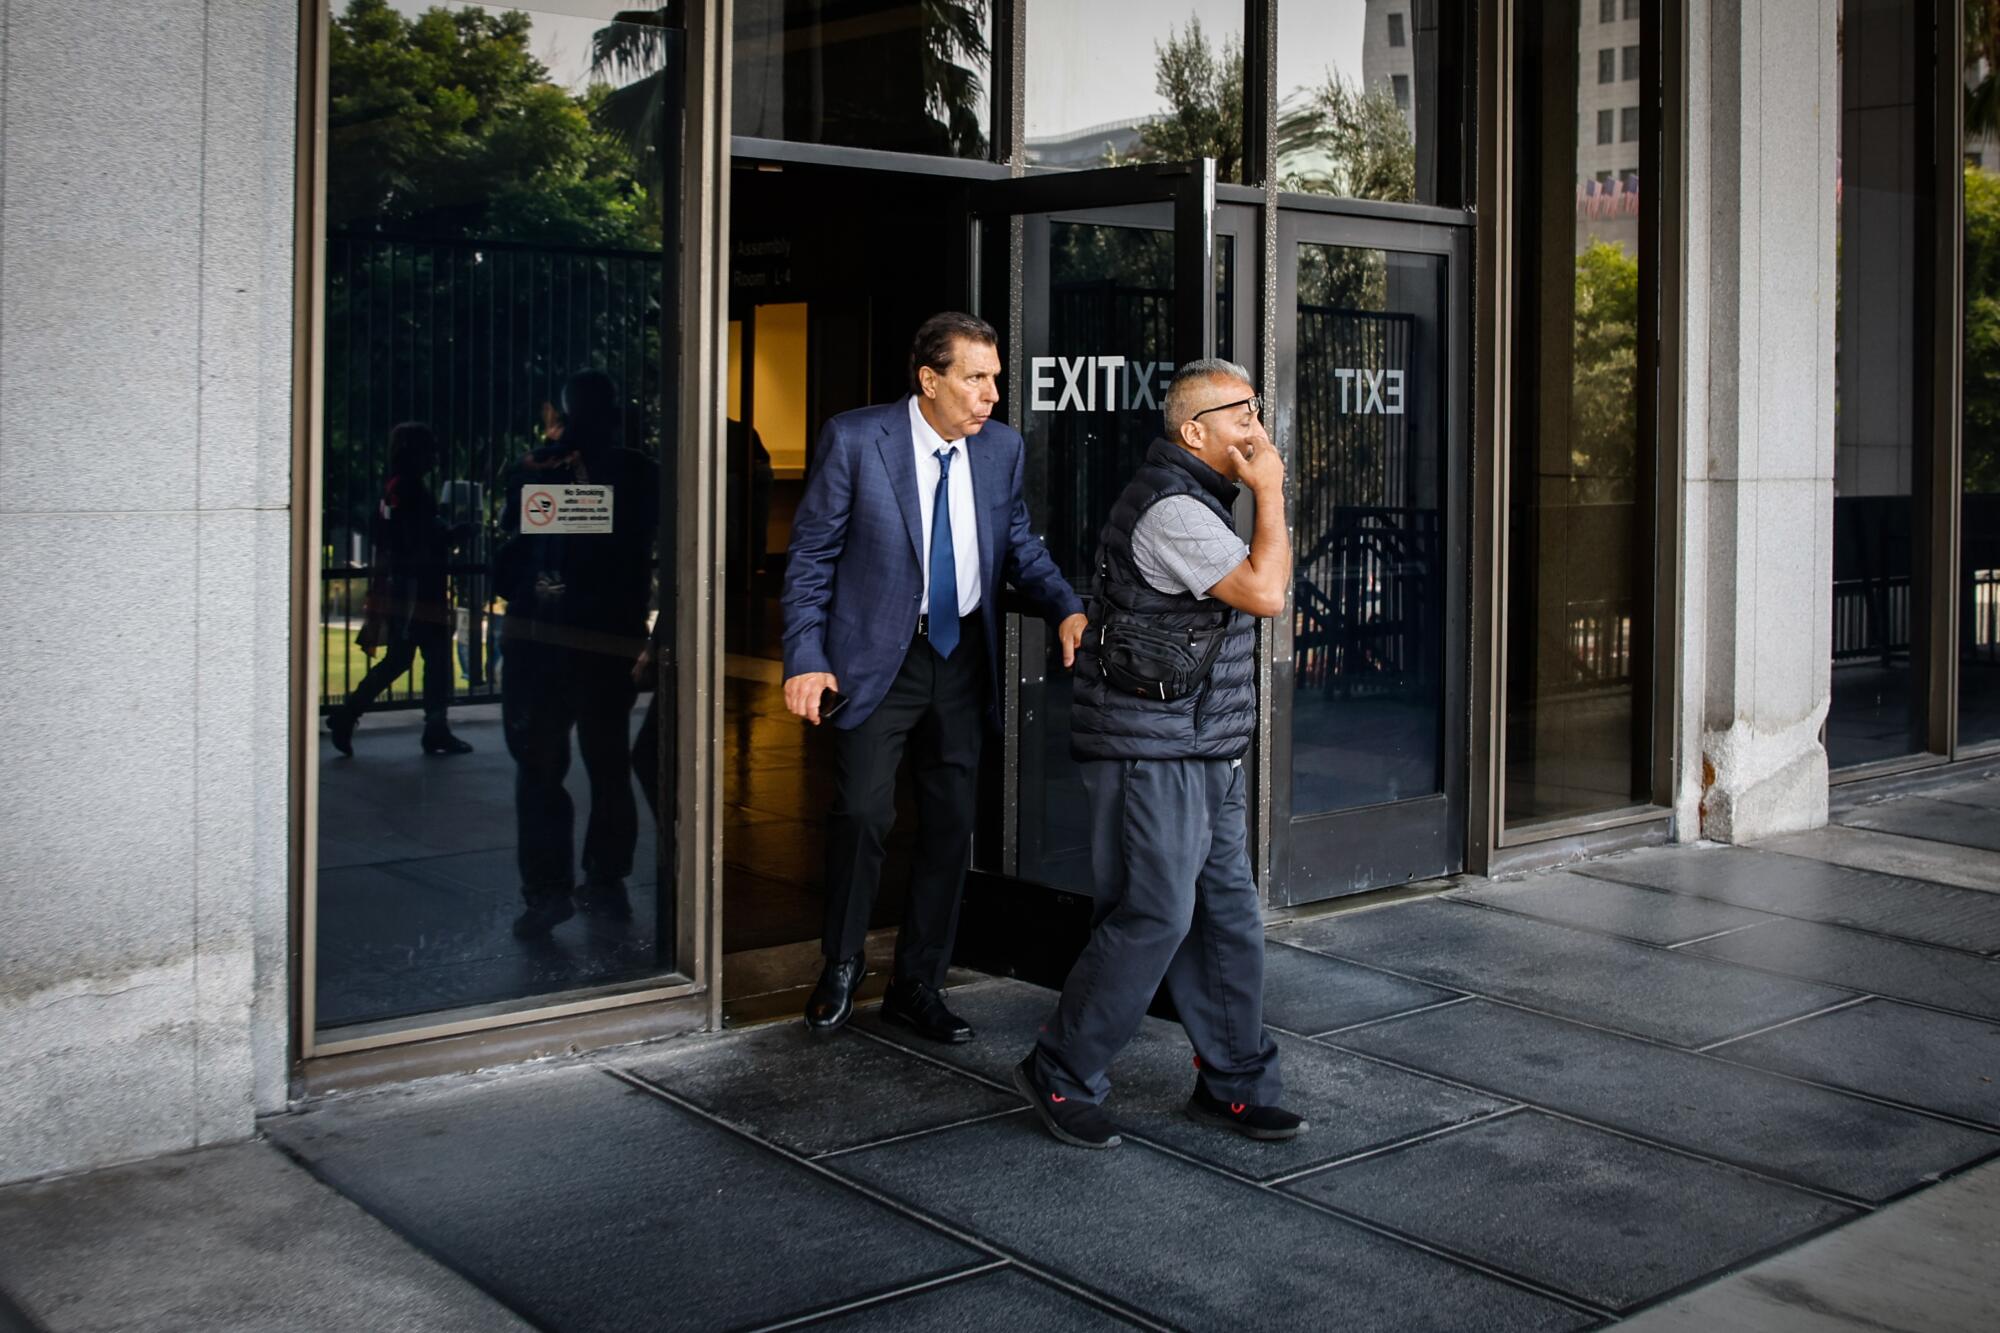 A man in a suit walks through the glass door of a courthouse behind another man.